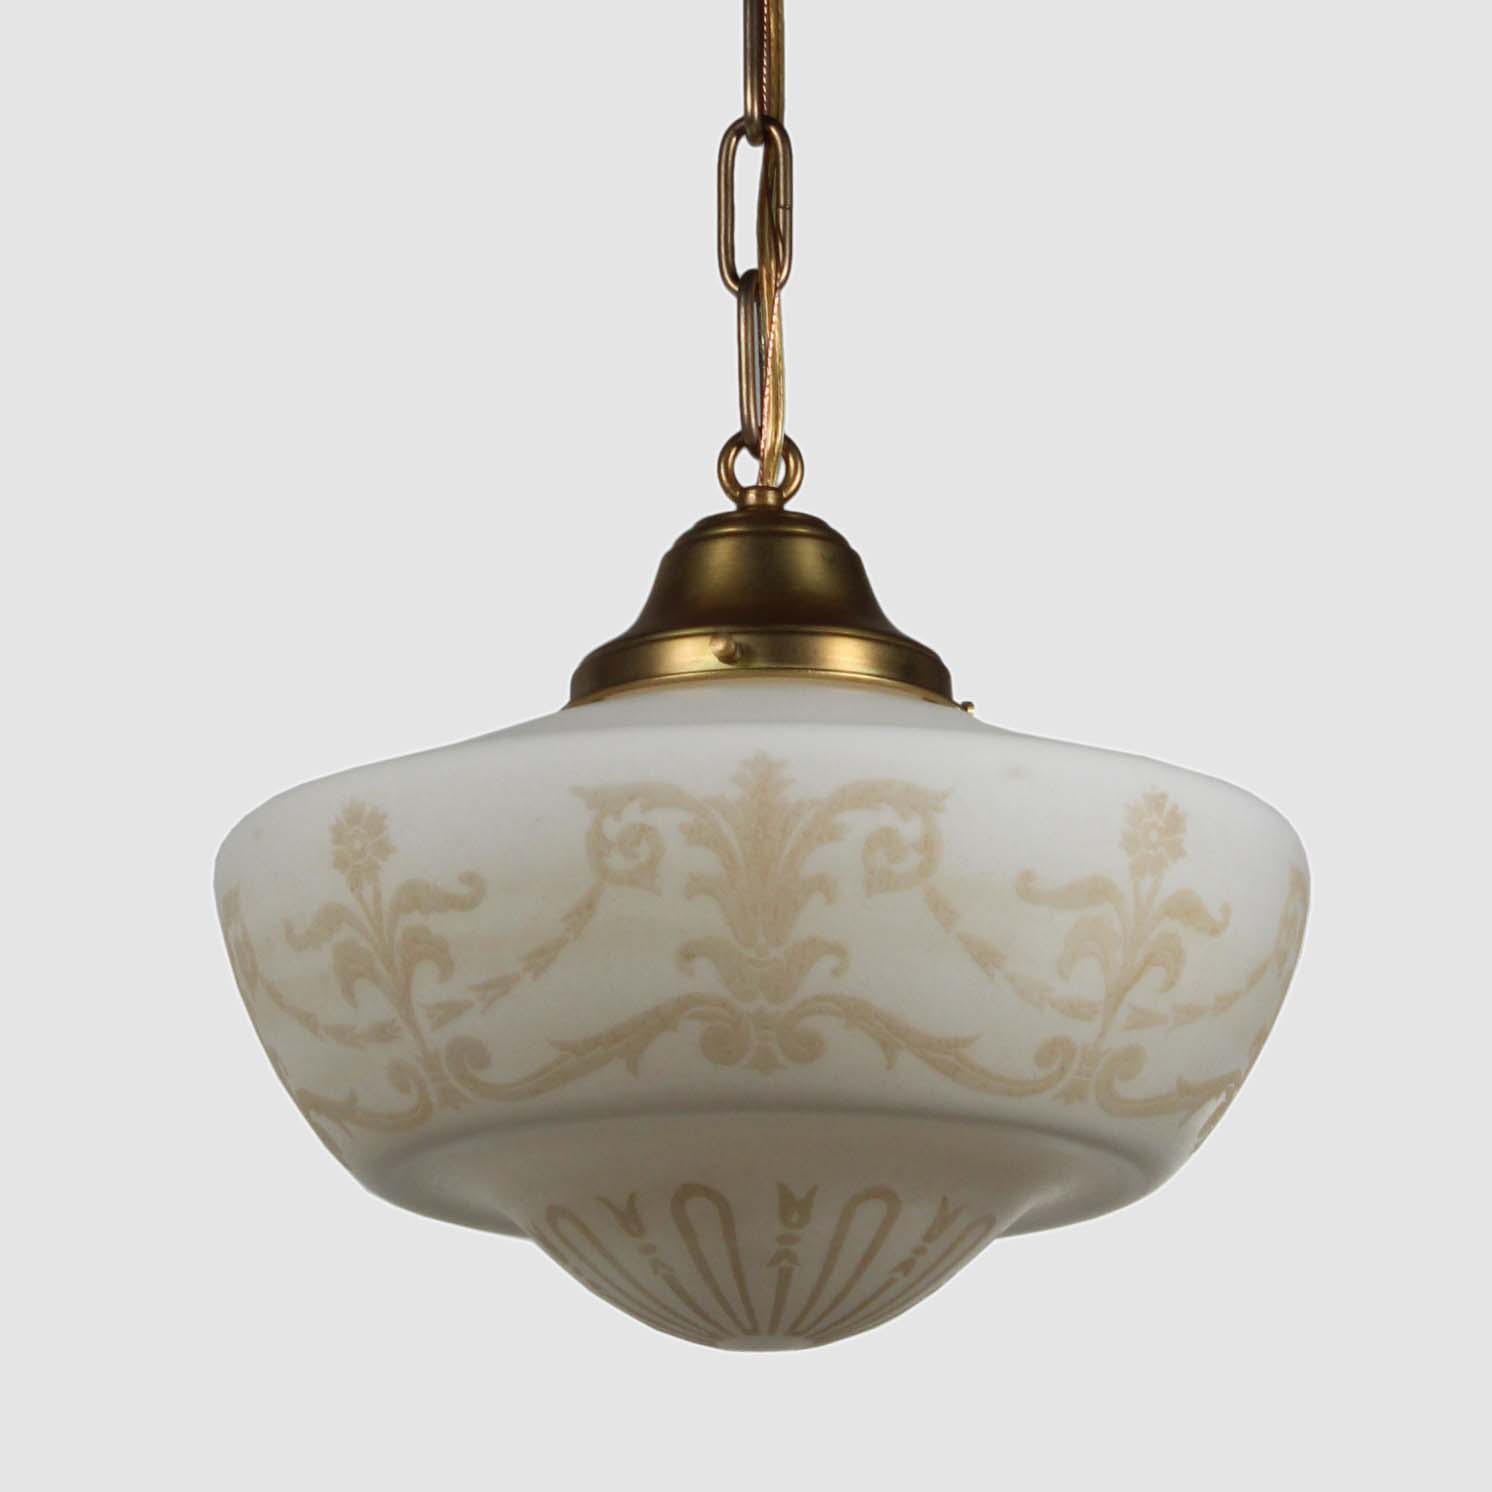 SOLD Neoclassical Pendant Lights with Acid Cut-Back Shades, Antique Lighting-71249